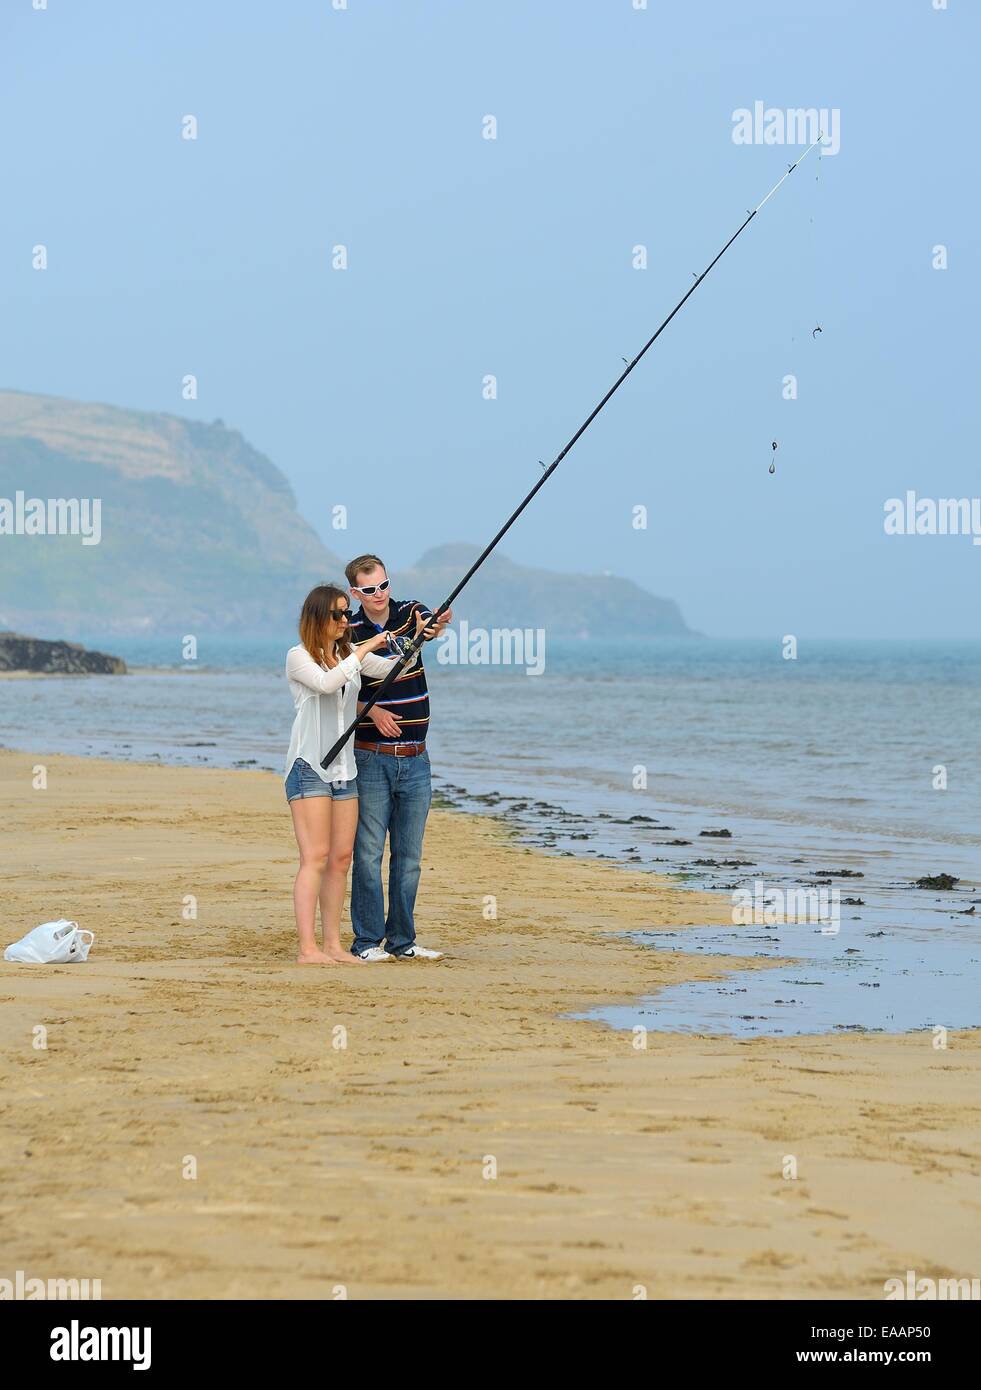 A young couple learning to fish on the beach in Padstow Cornwall England uk Stock Photo